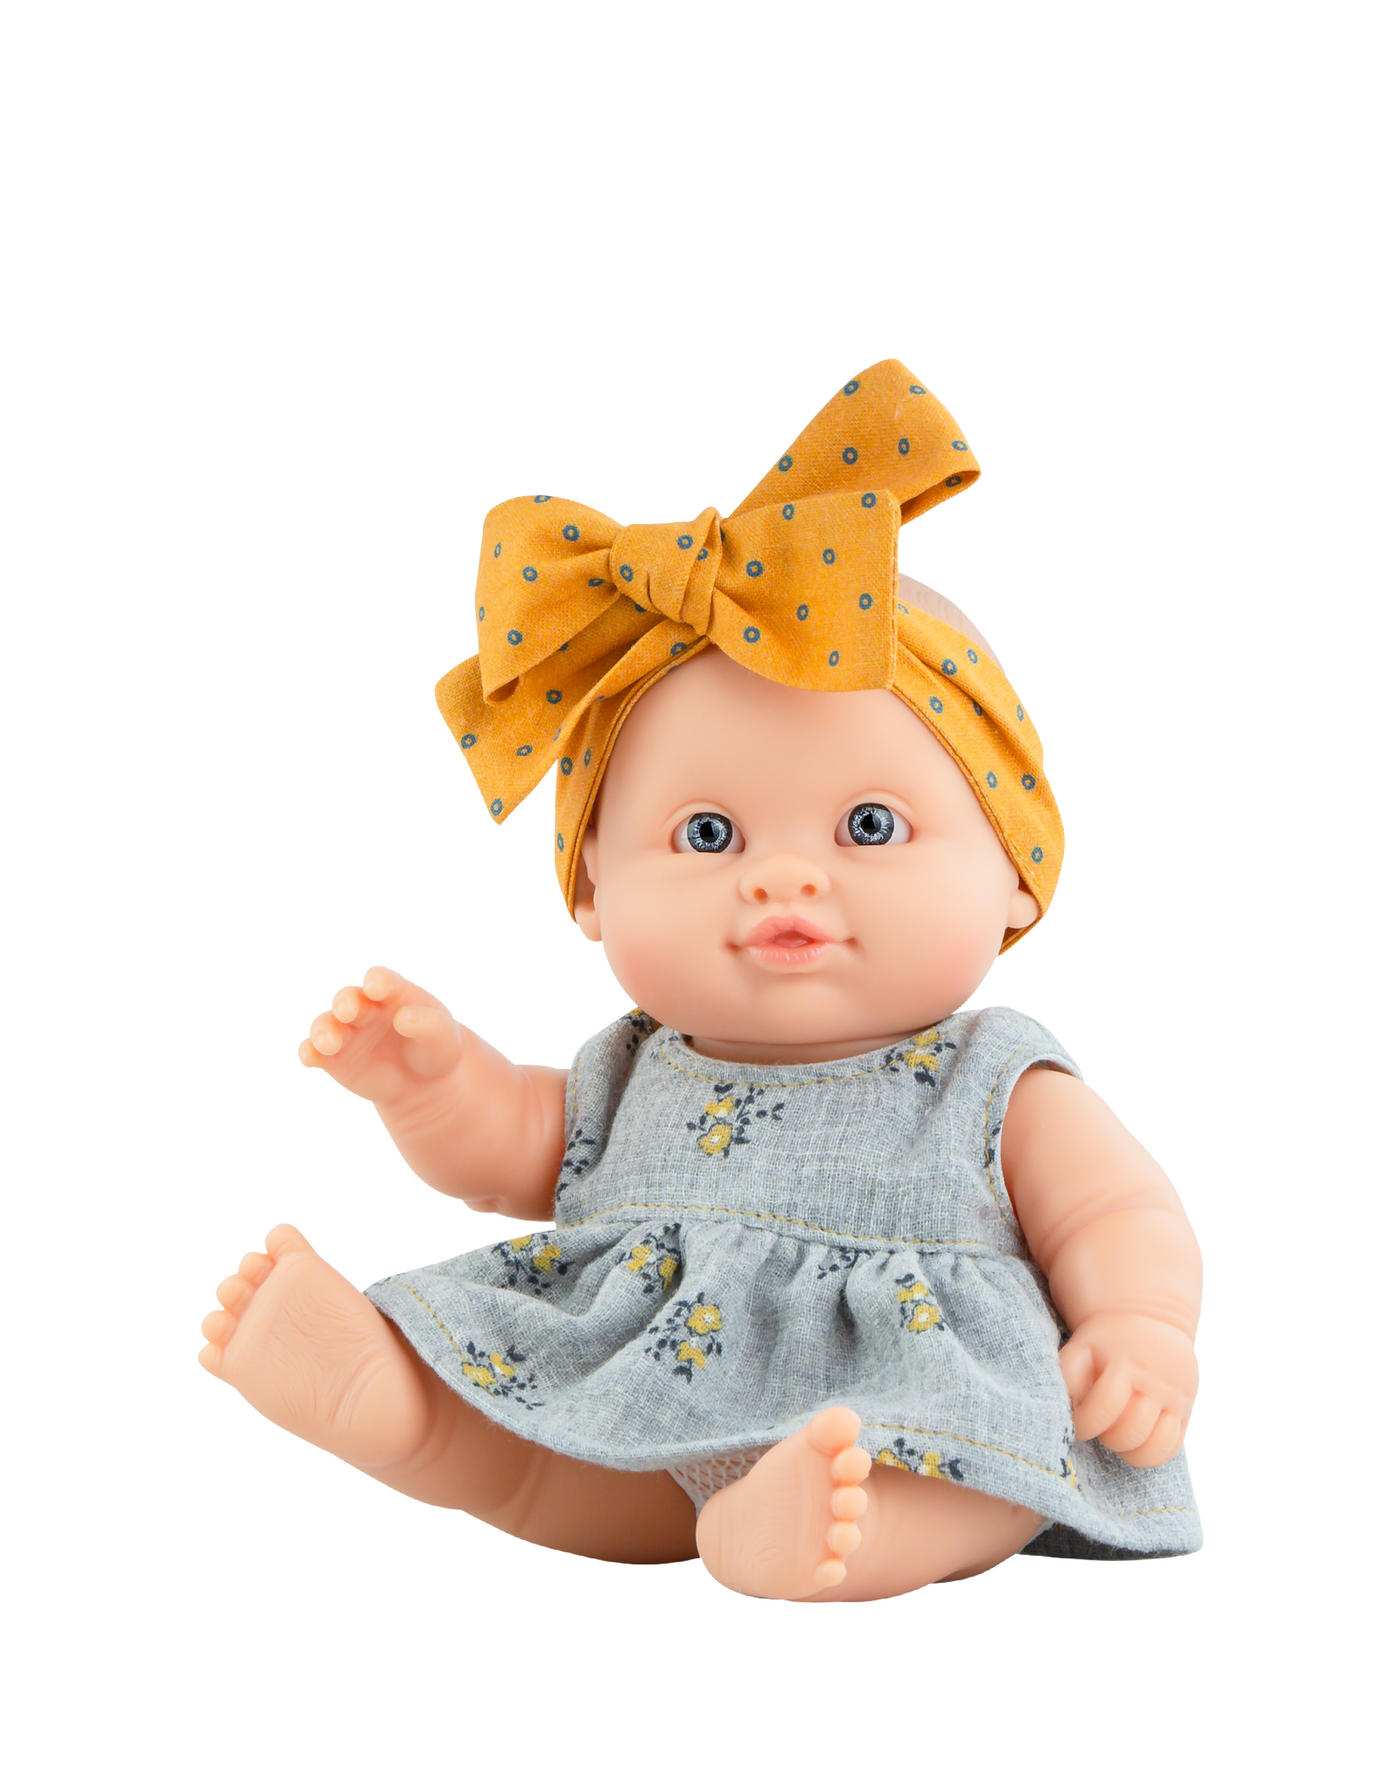 Peques doll - Irina with grey floral dress and mustard headband - Paola Reina